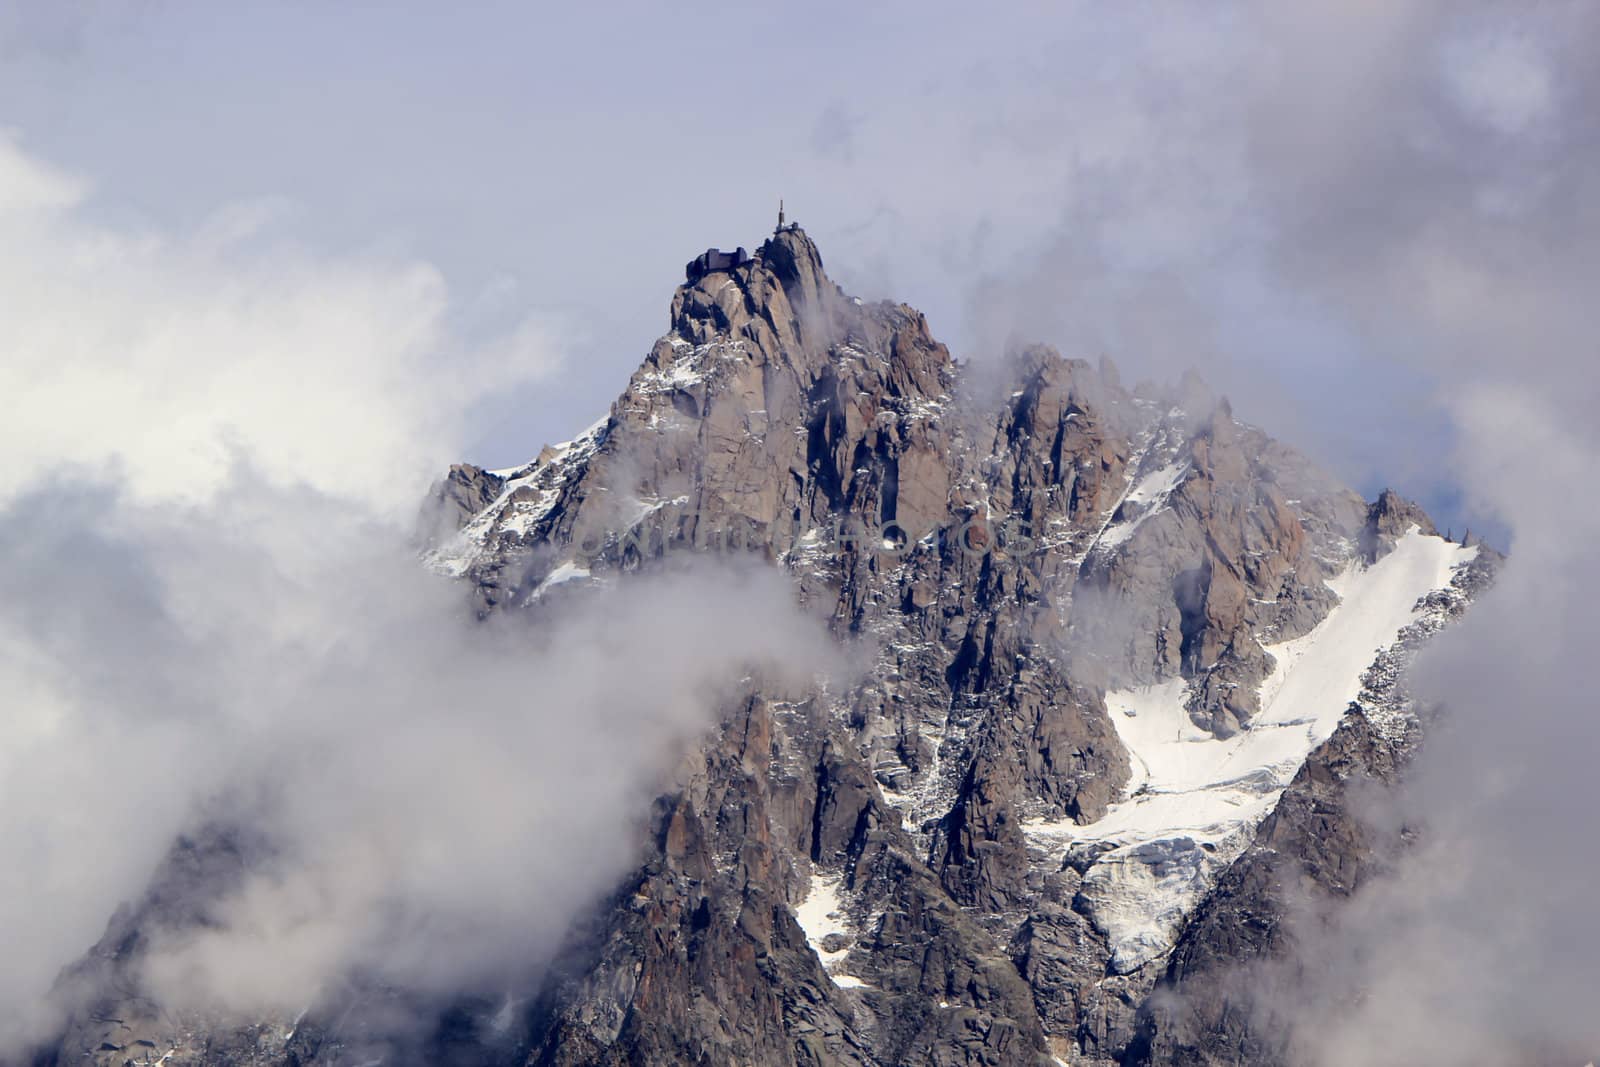 View of Aiguille Du Midi surrounded by lots of clouds from Chamonix, France